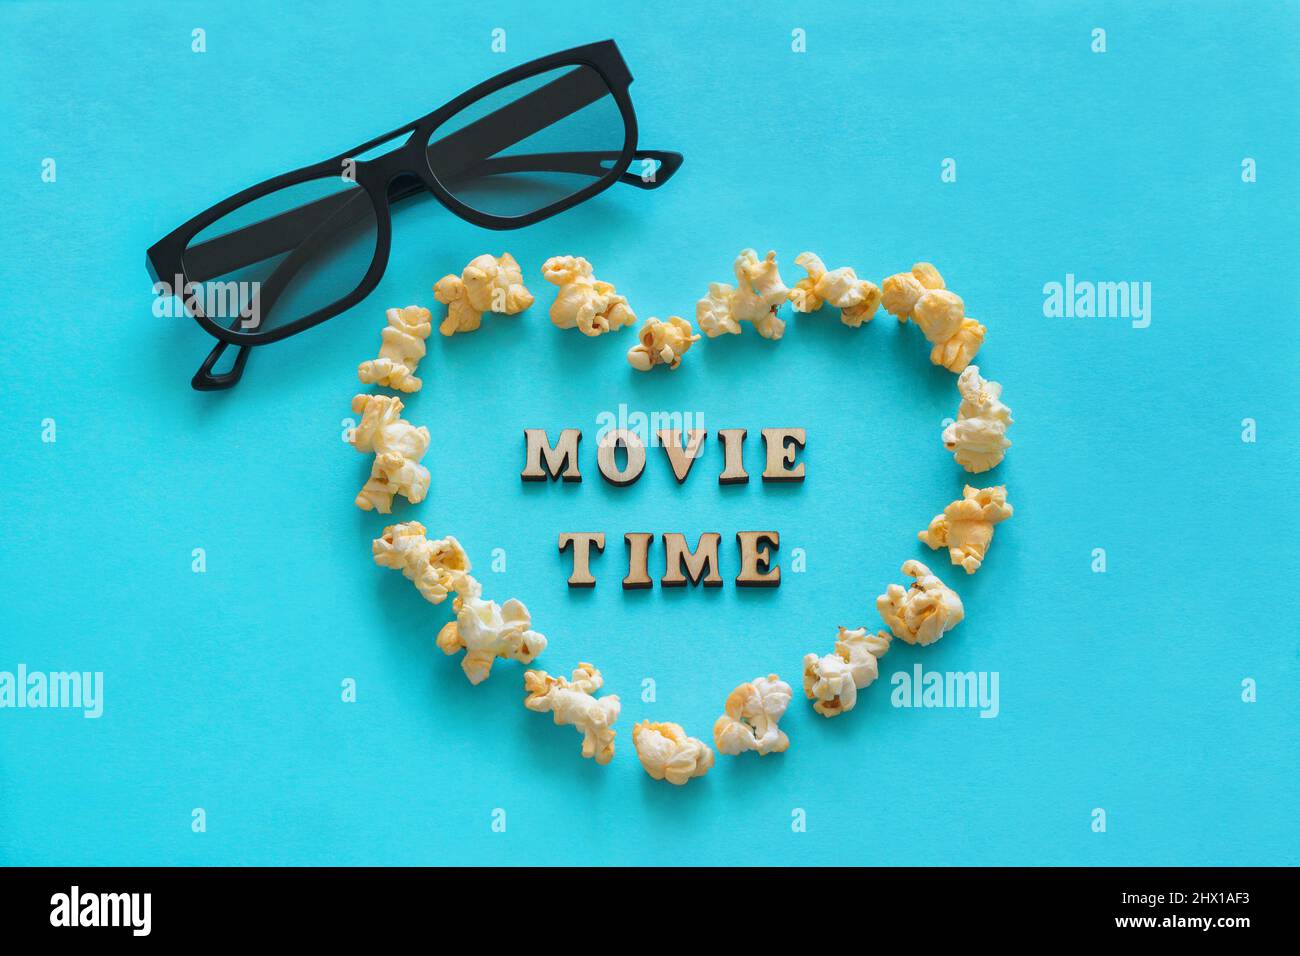 Popcorn in shape heart, 3D glasses, the text 'Movie time'. Still life on blue background. Flat lay, Top view.  Concept - love of cinema, lover of cine Stock Photo